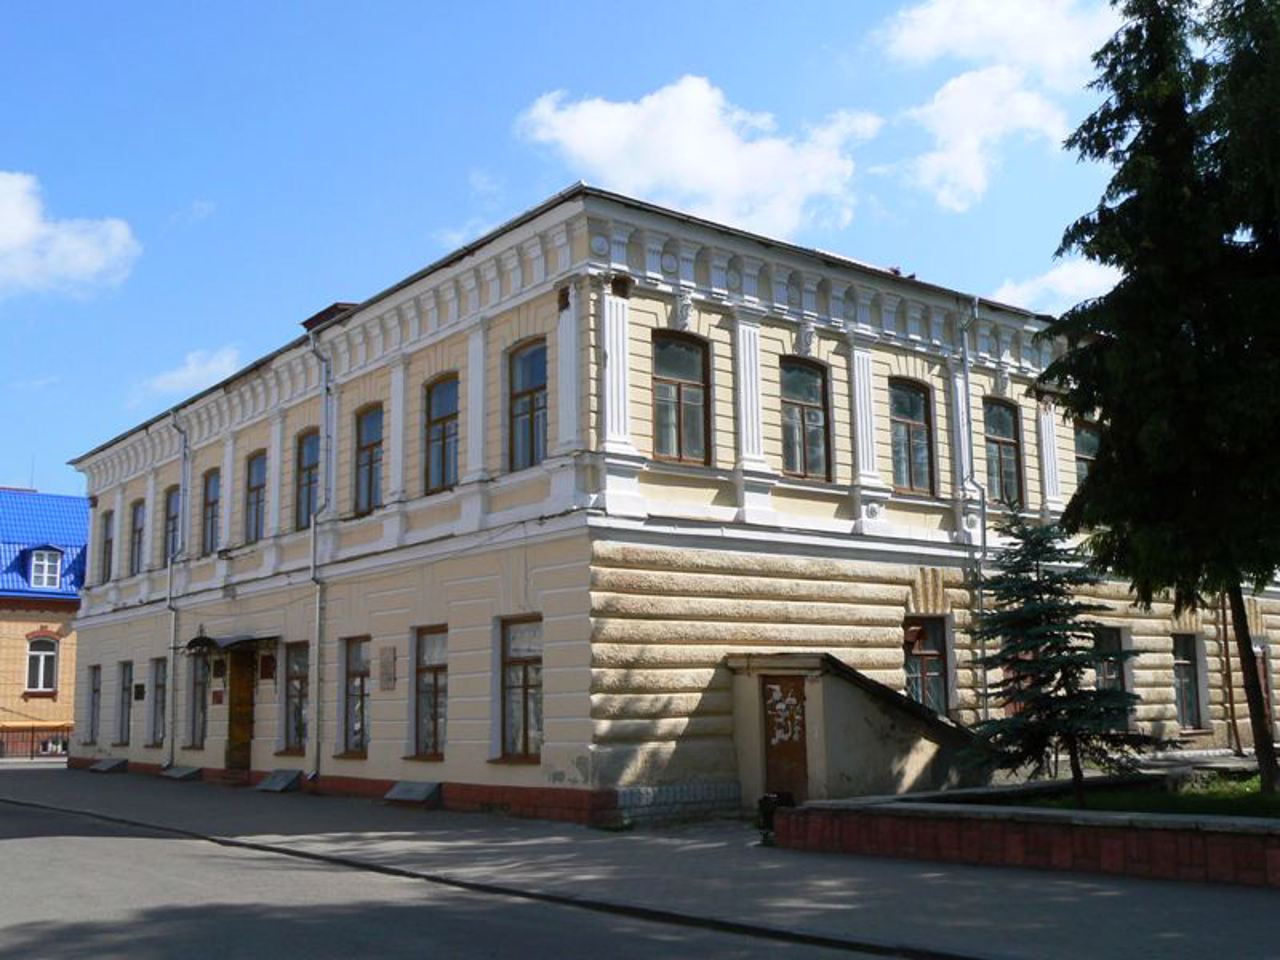 Contract House, Dubno